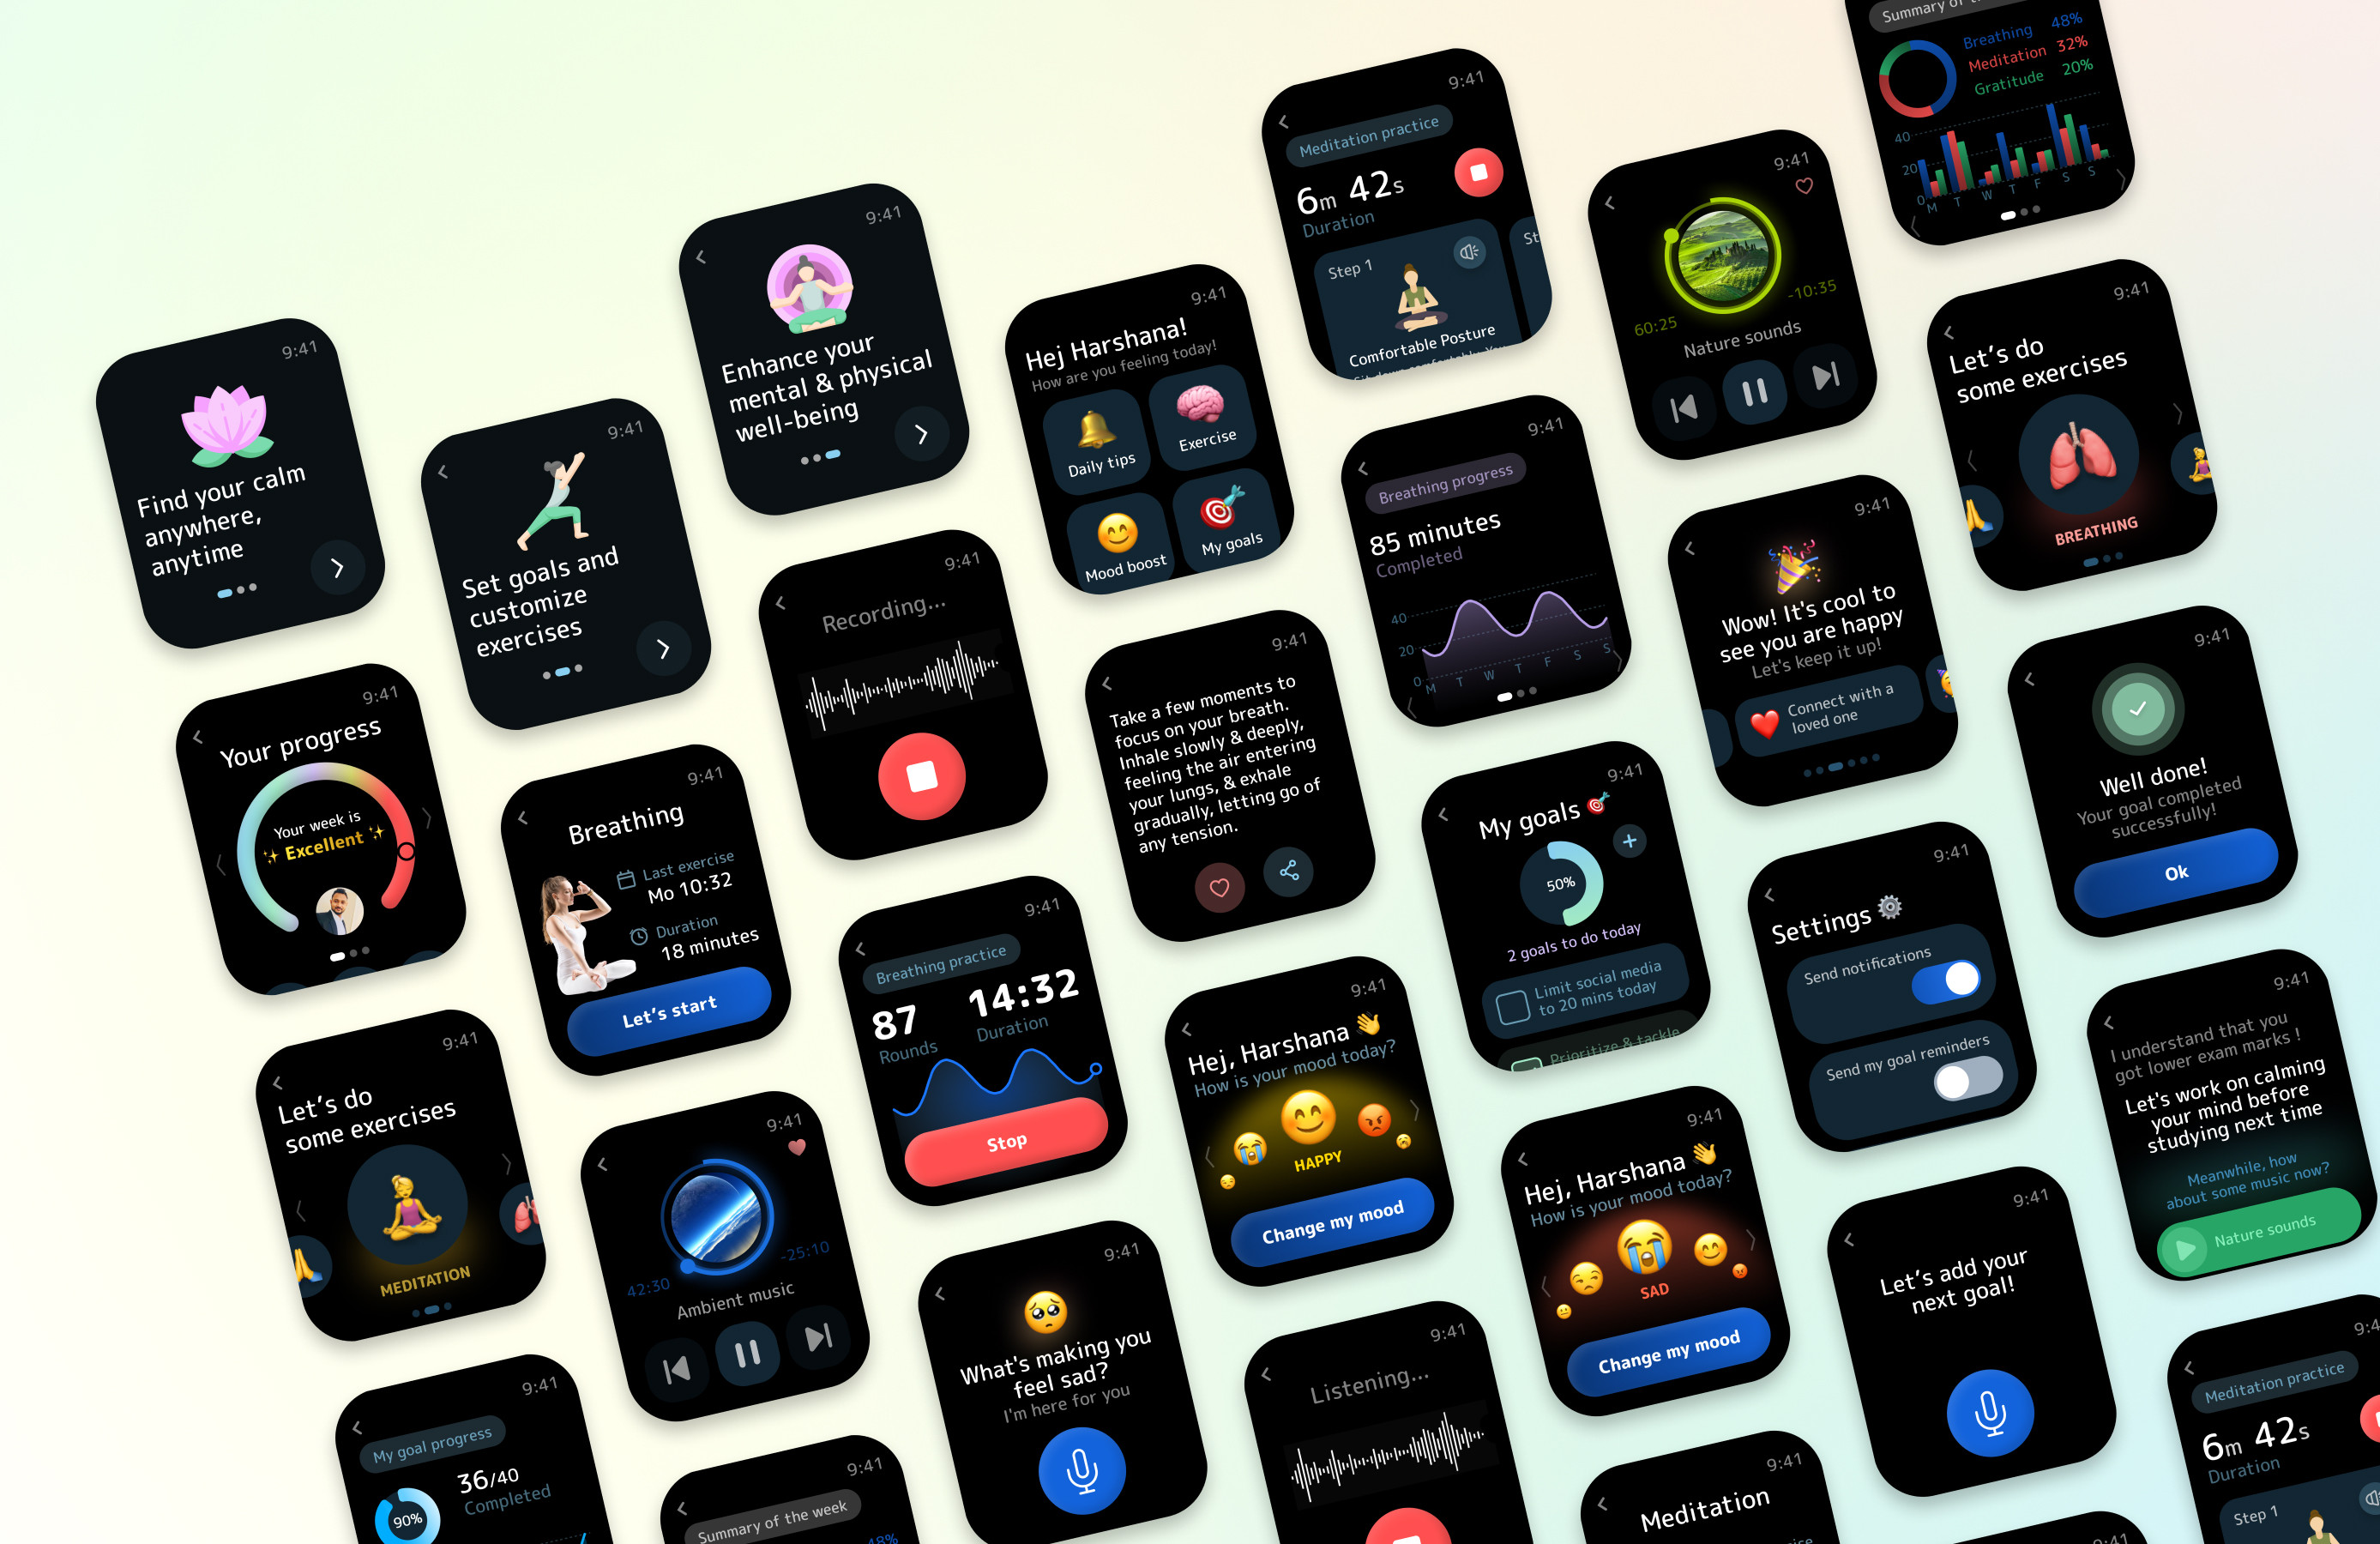 Mindful Minute watch OS app case study by Harshana Gamage